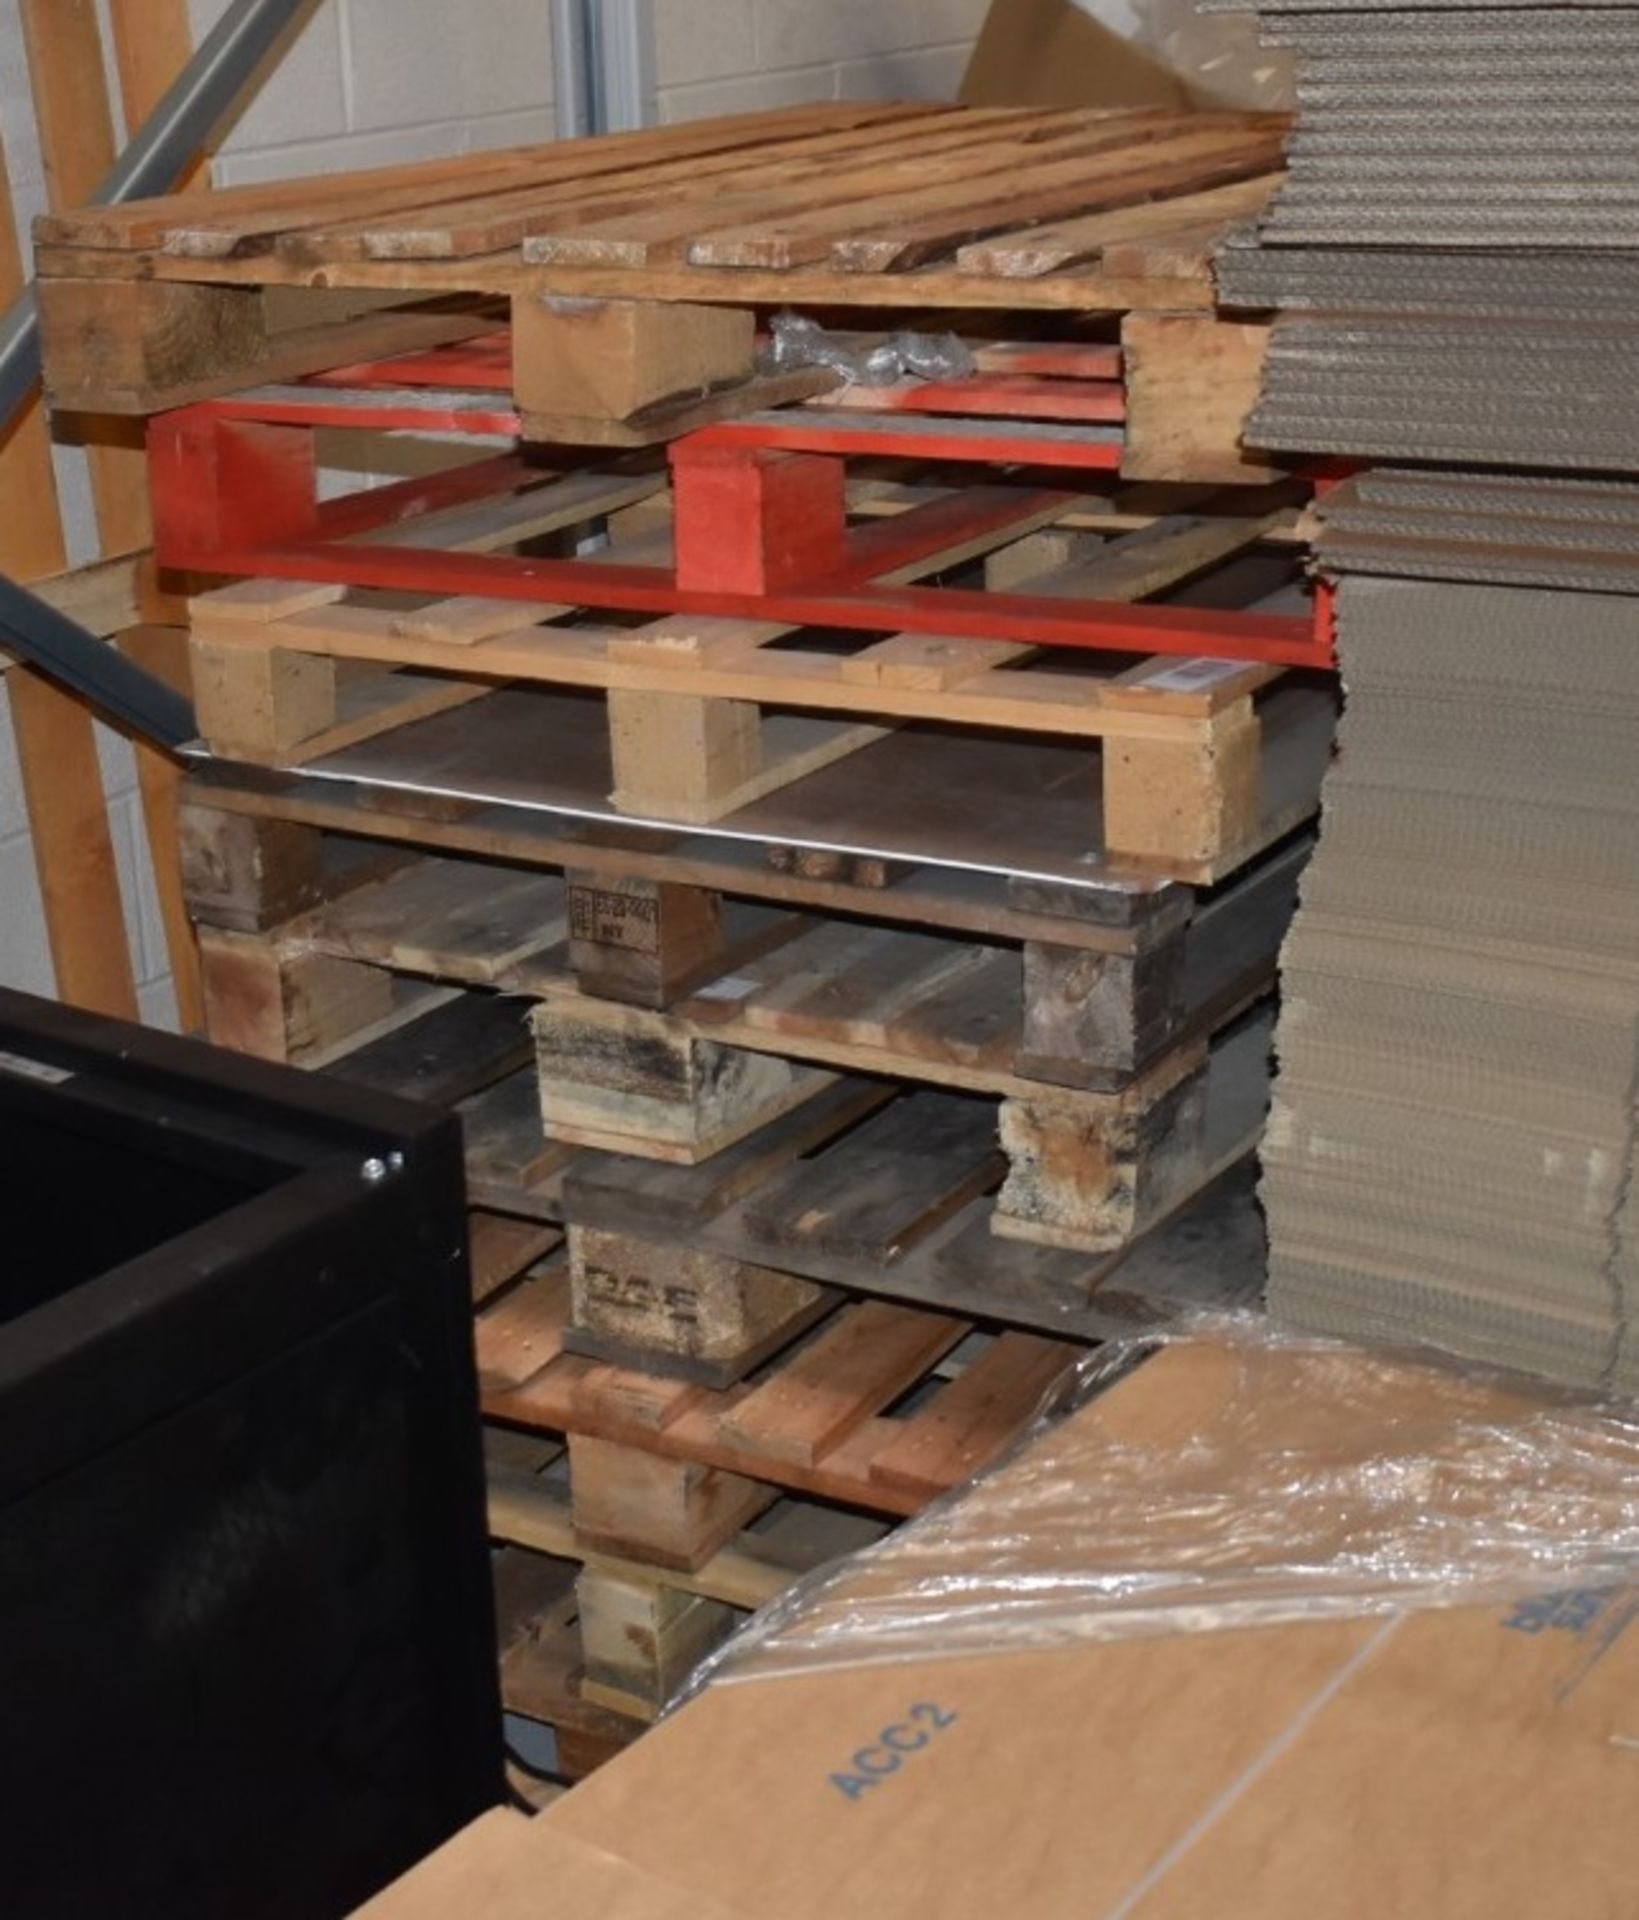 Approx 120 x UK Sized Pallets - 120 x 100 cm Wooden Pallets From Warehouse Clearance - The Pallets - Image 8 of 11